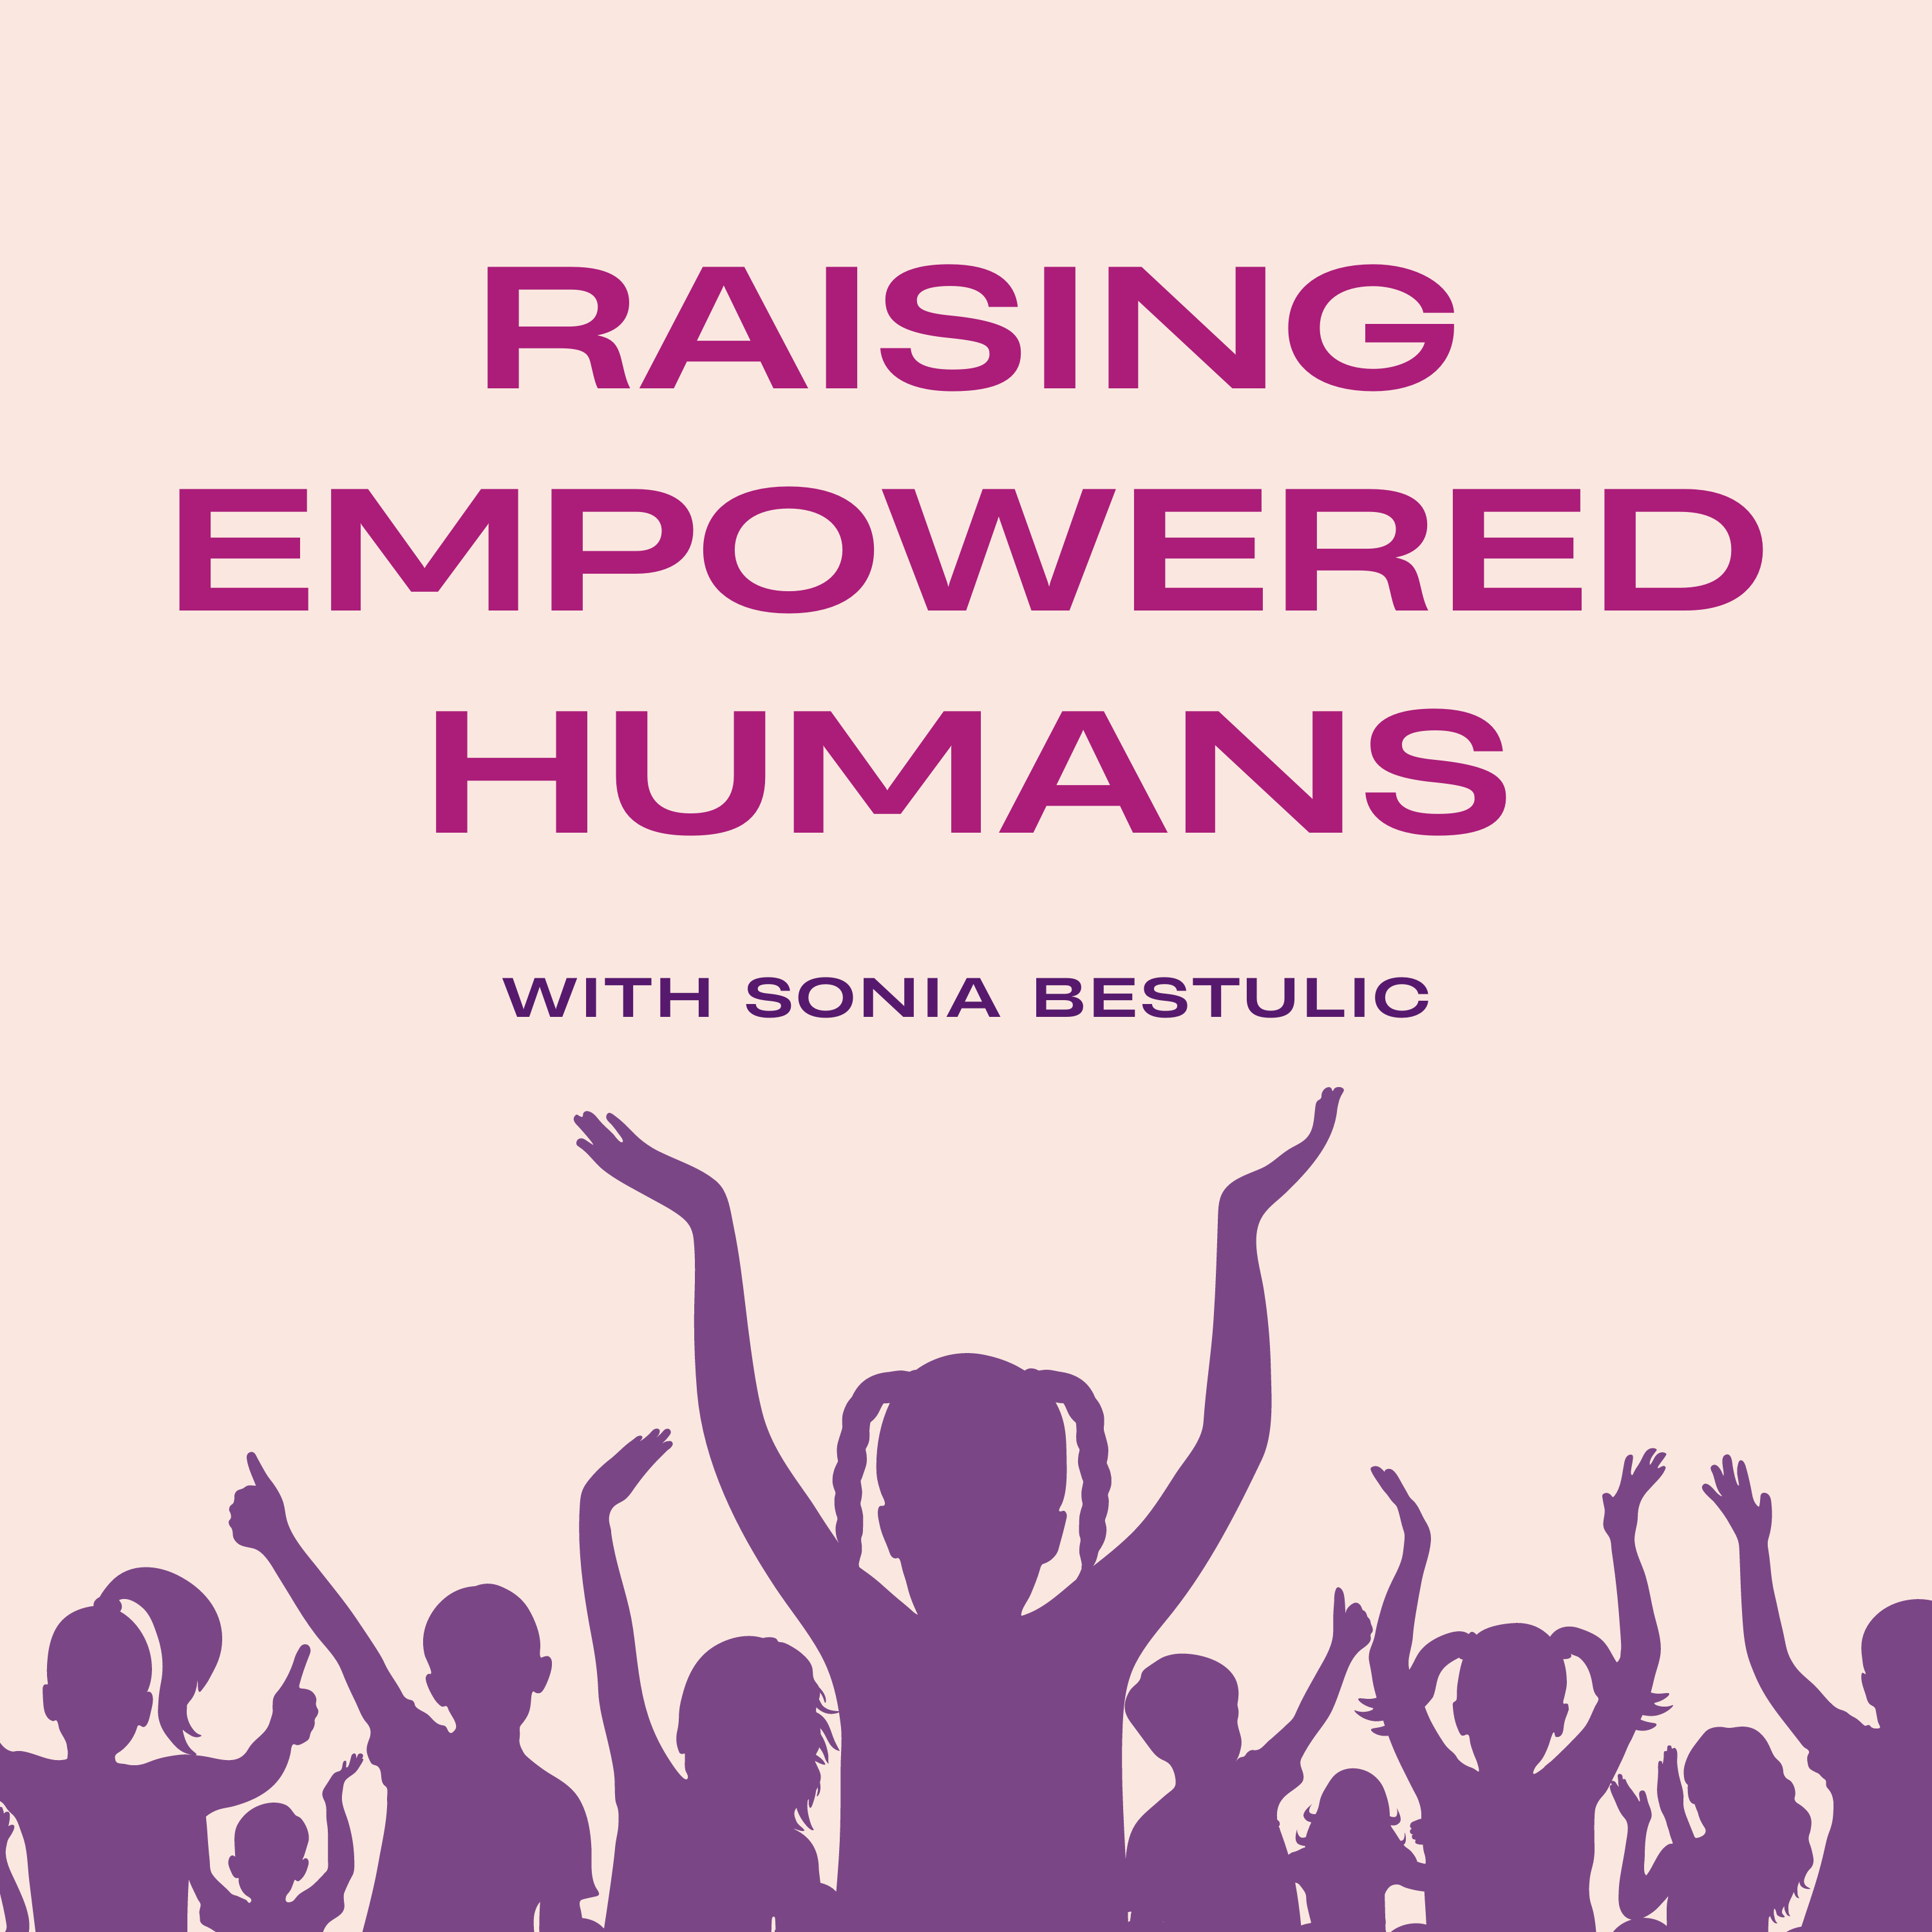 CC88 - The 4 Key Principles to Raising Empowered Humans with Host Sonia Bestulic